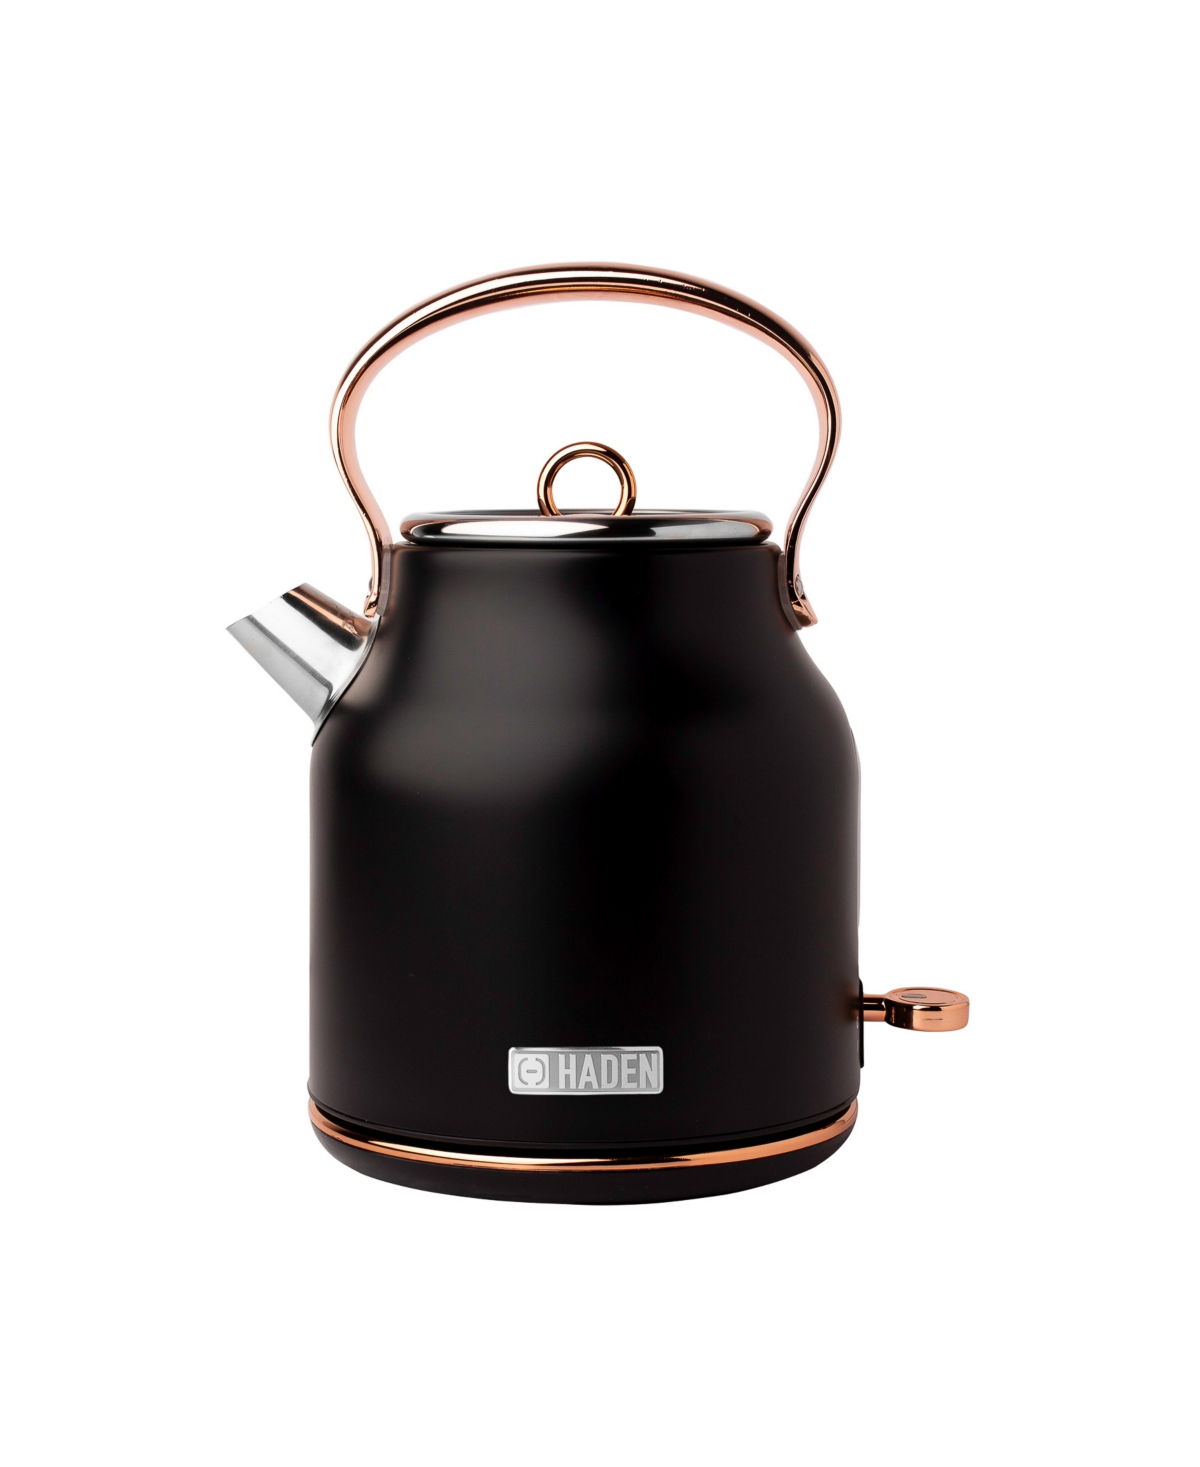 Haden Heritage 1.7 L- 7 Cup Stainless Steel Electric Kettle With Auto Shut-off And Boil-dry Protection In Black,copper